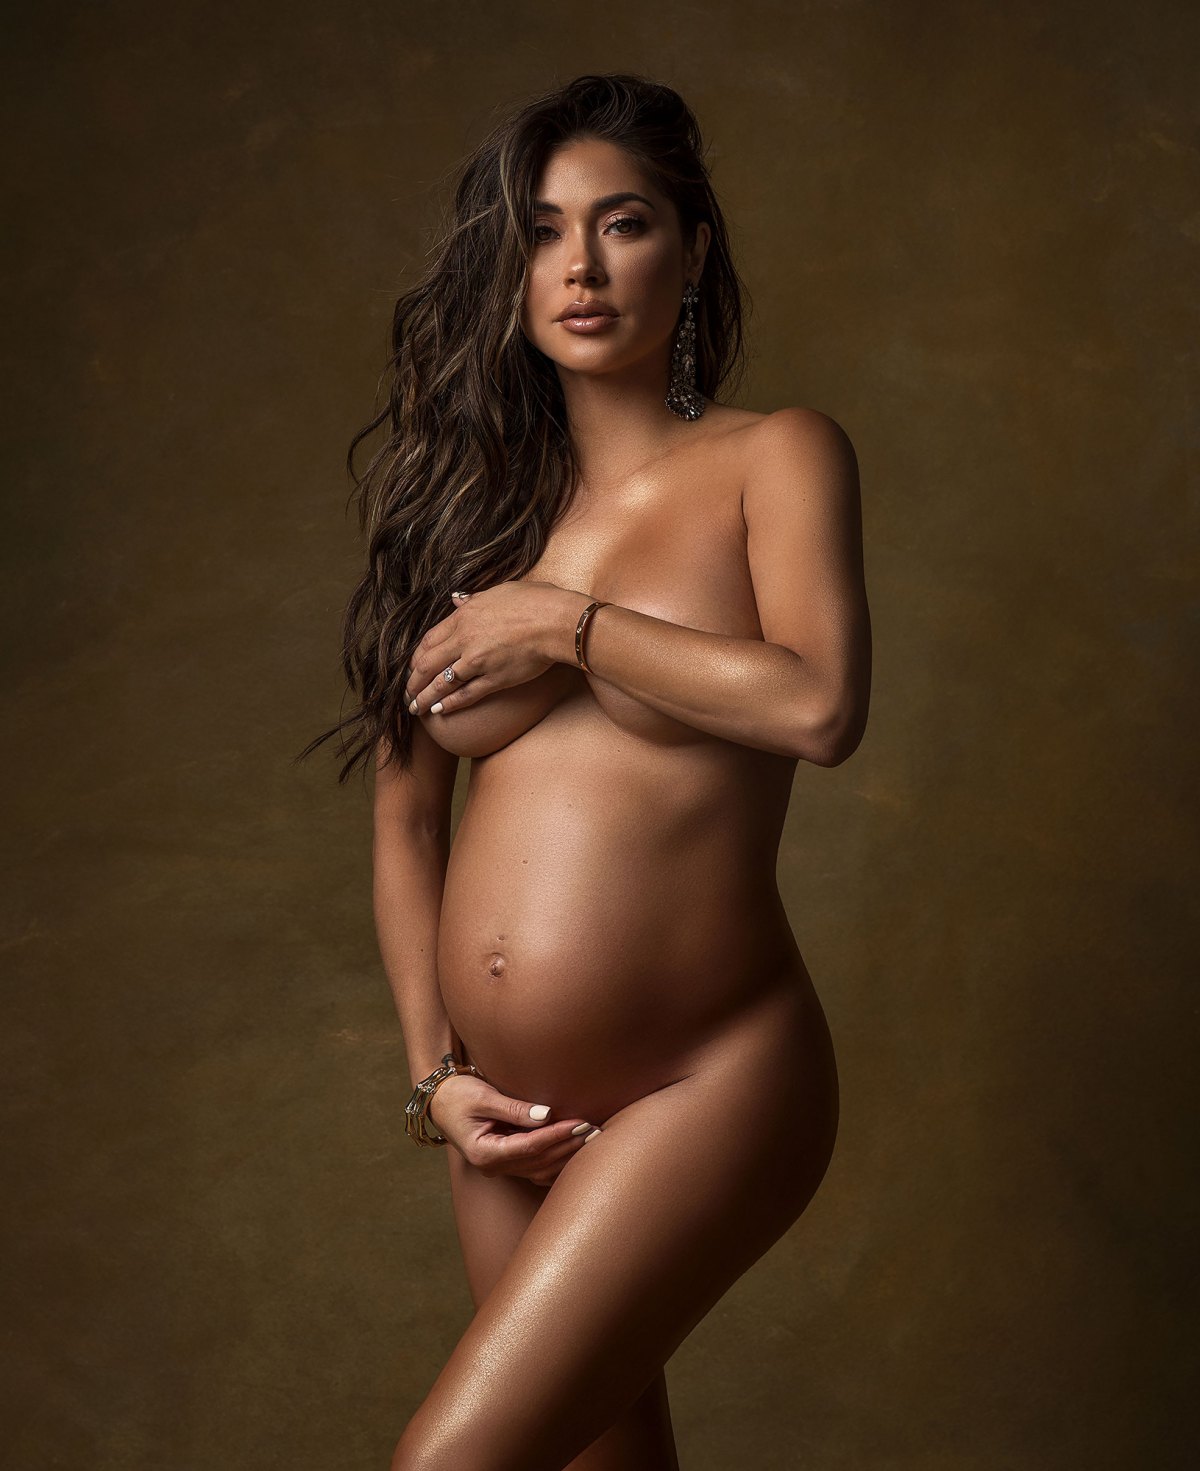 Beautiful Sexy Pregnant Nude - Celebrities Posing Nude While Pregnant: Maternity Pics